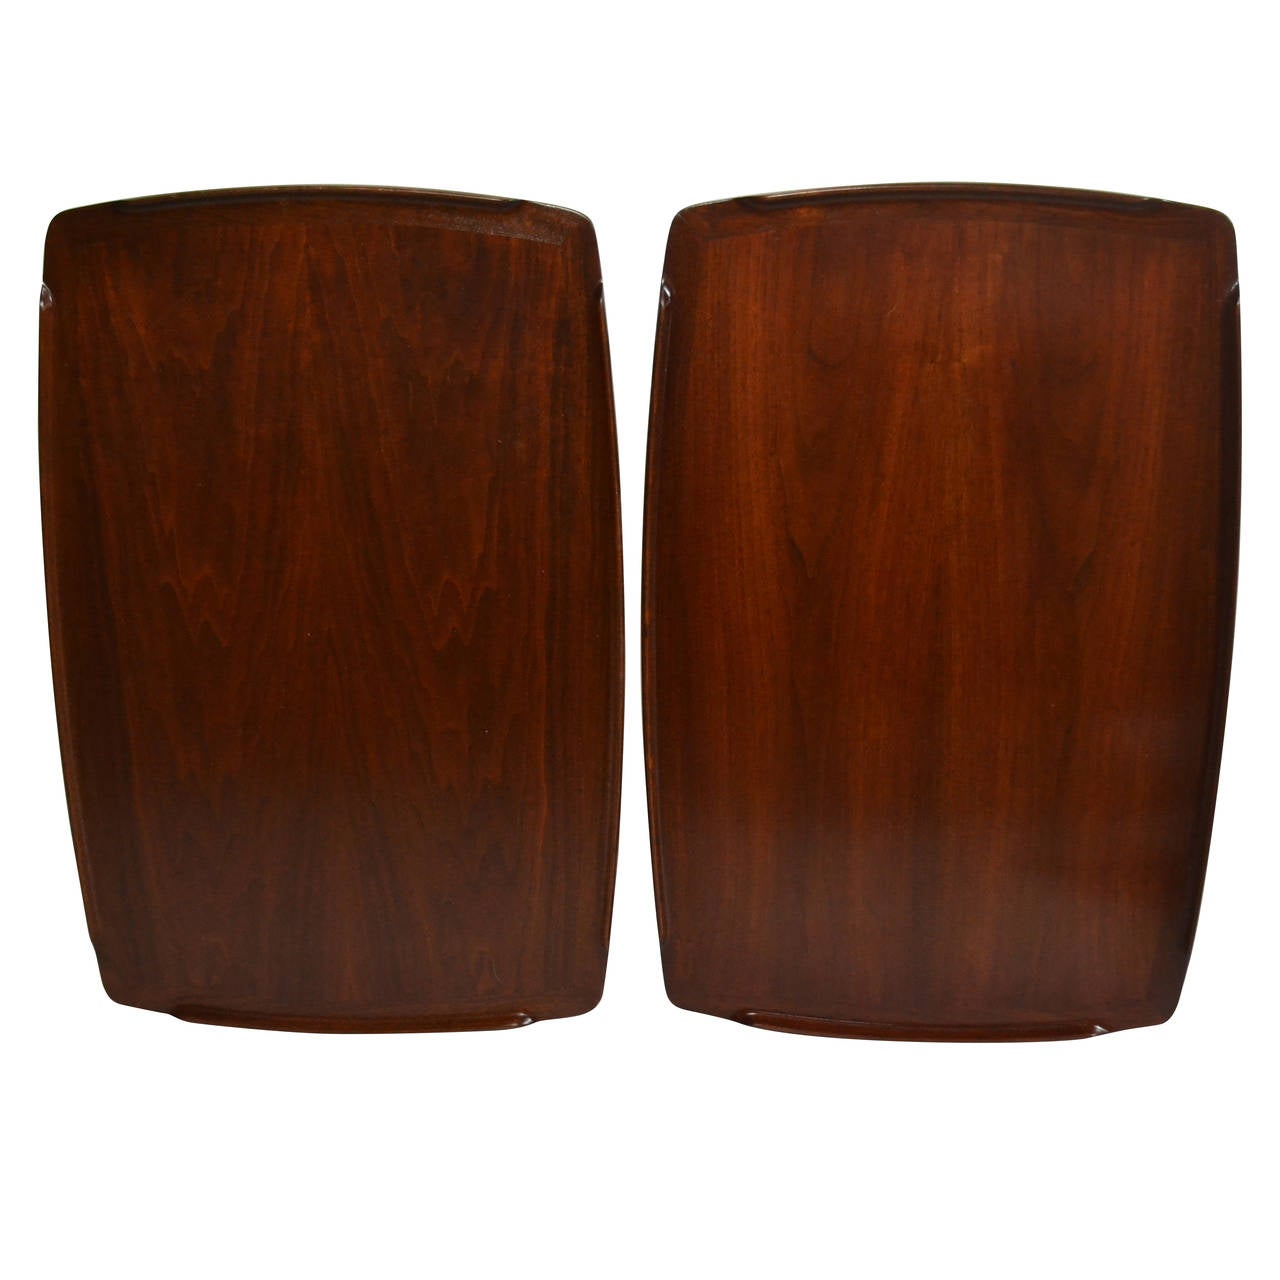 Poul Jensen sculpted hand crafted pair of Danish teak and cane end tables. 

The tables were designed for CFC Silkeborg and imported by Selig during the 1950's.
The teak frames and caned shelves are in excellent condition..